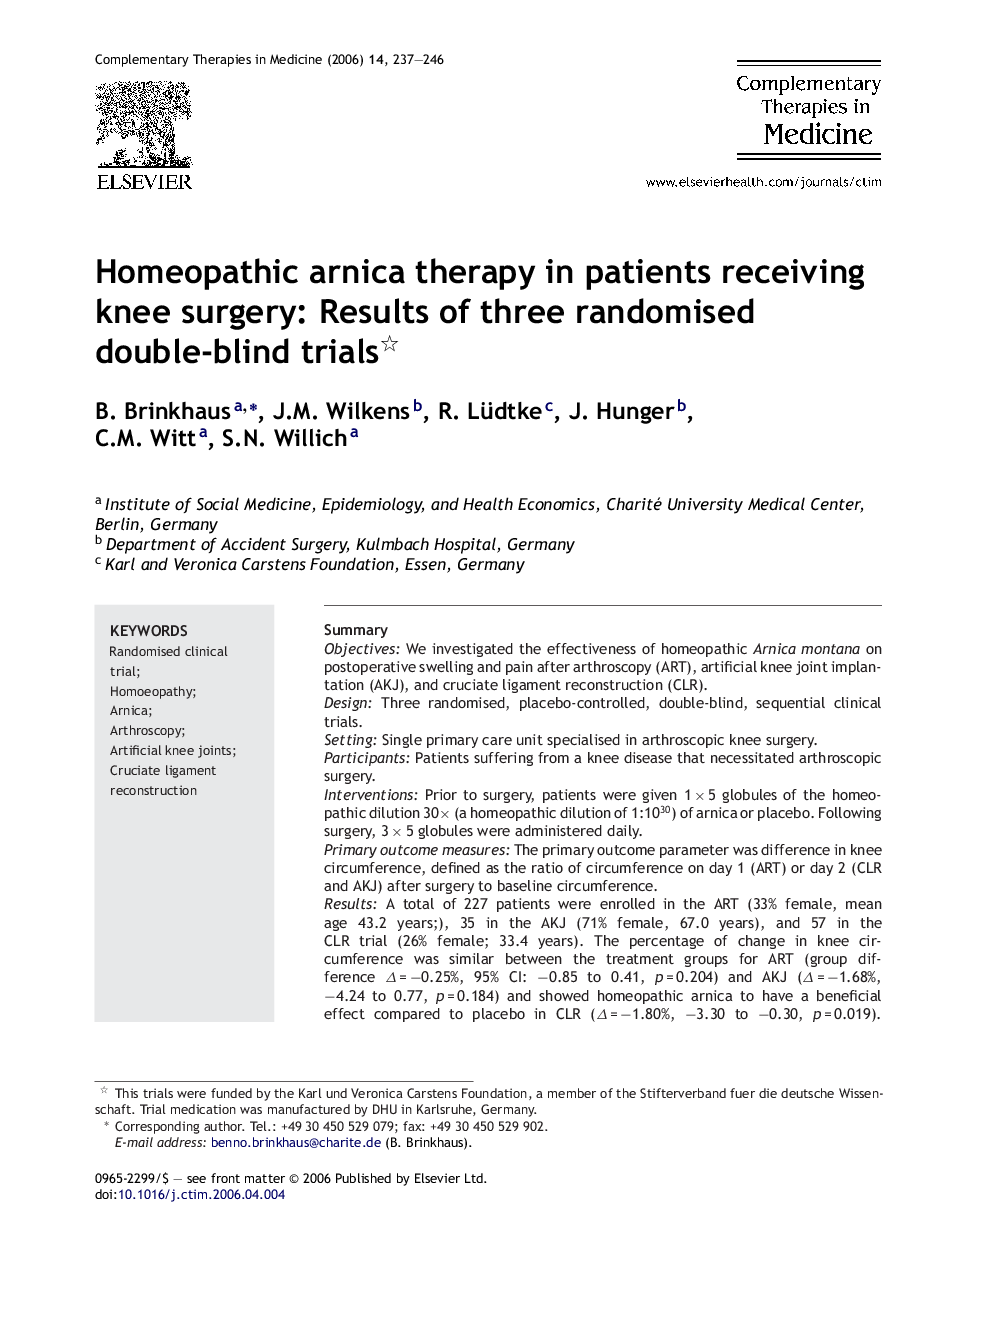 Homeopathic arnica therapy in patients receiving knee surgery: Results of three randomised double-blind trials 